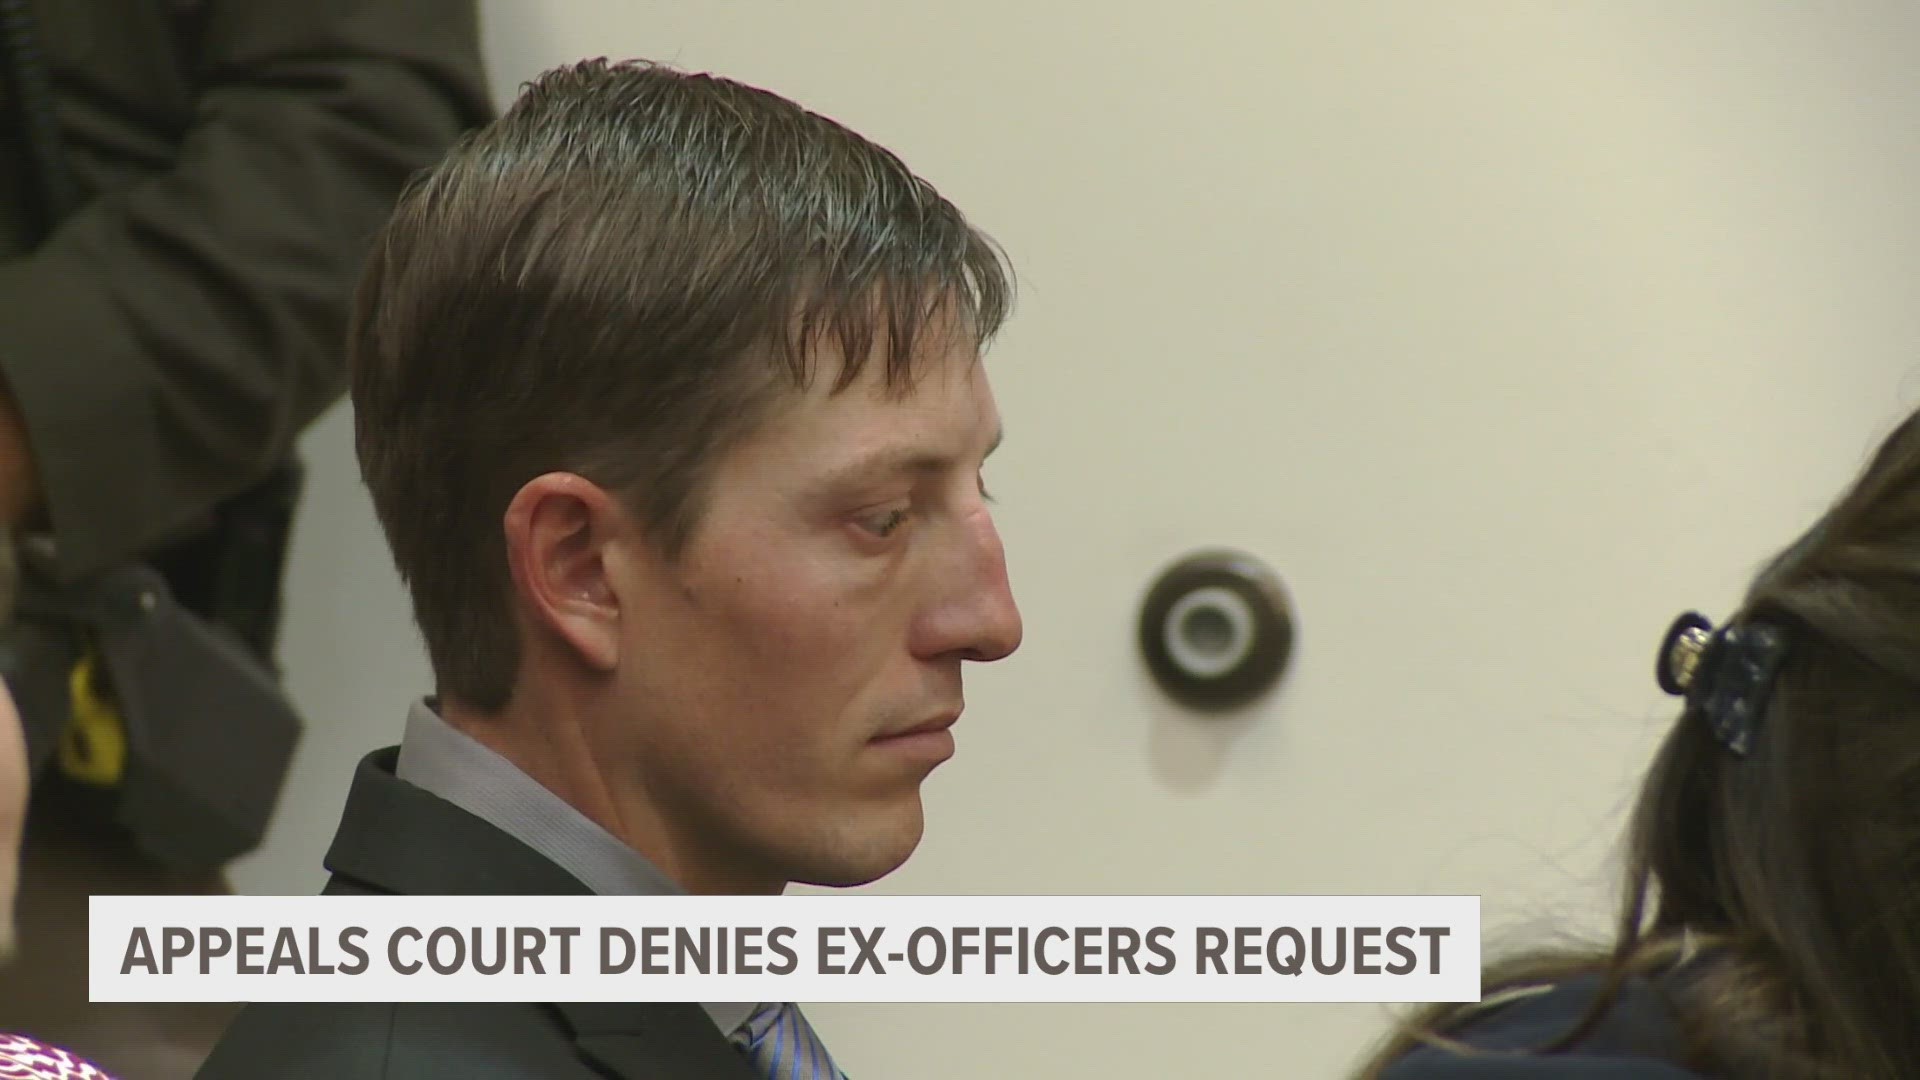 The Michigan Court of Appeals won't reconsider its ruling that there is enough evidence to send former the Grand Rapids Police Officer to trial for murder.